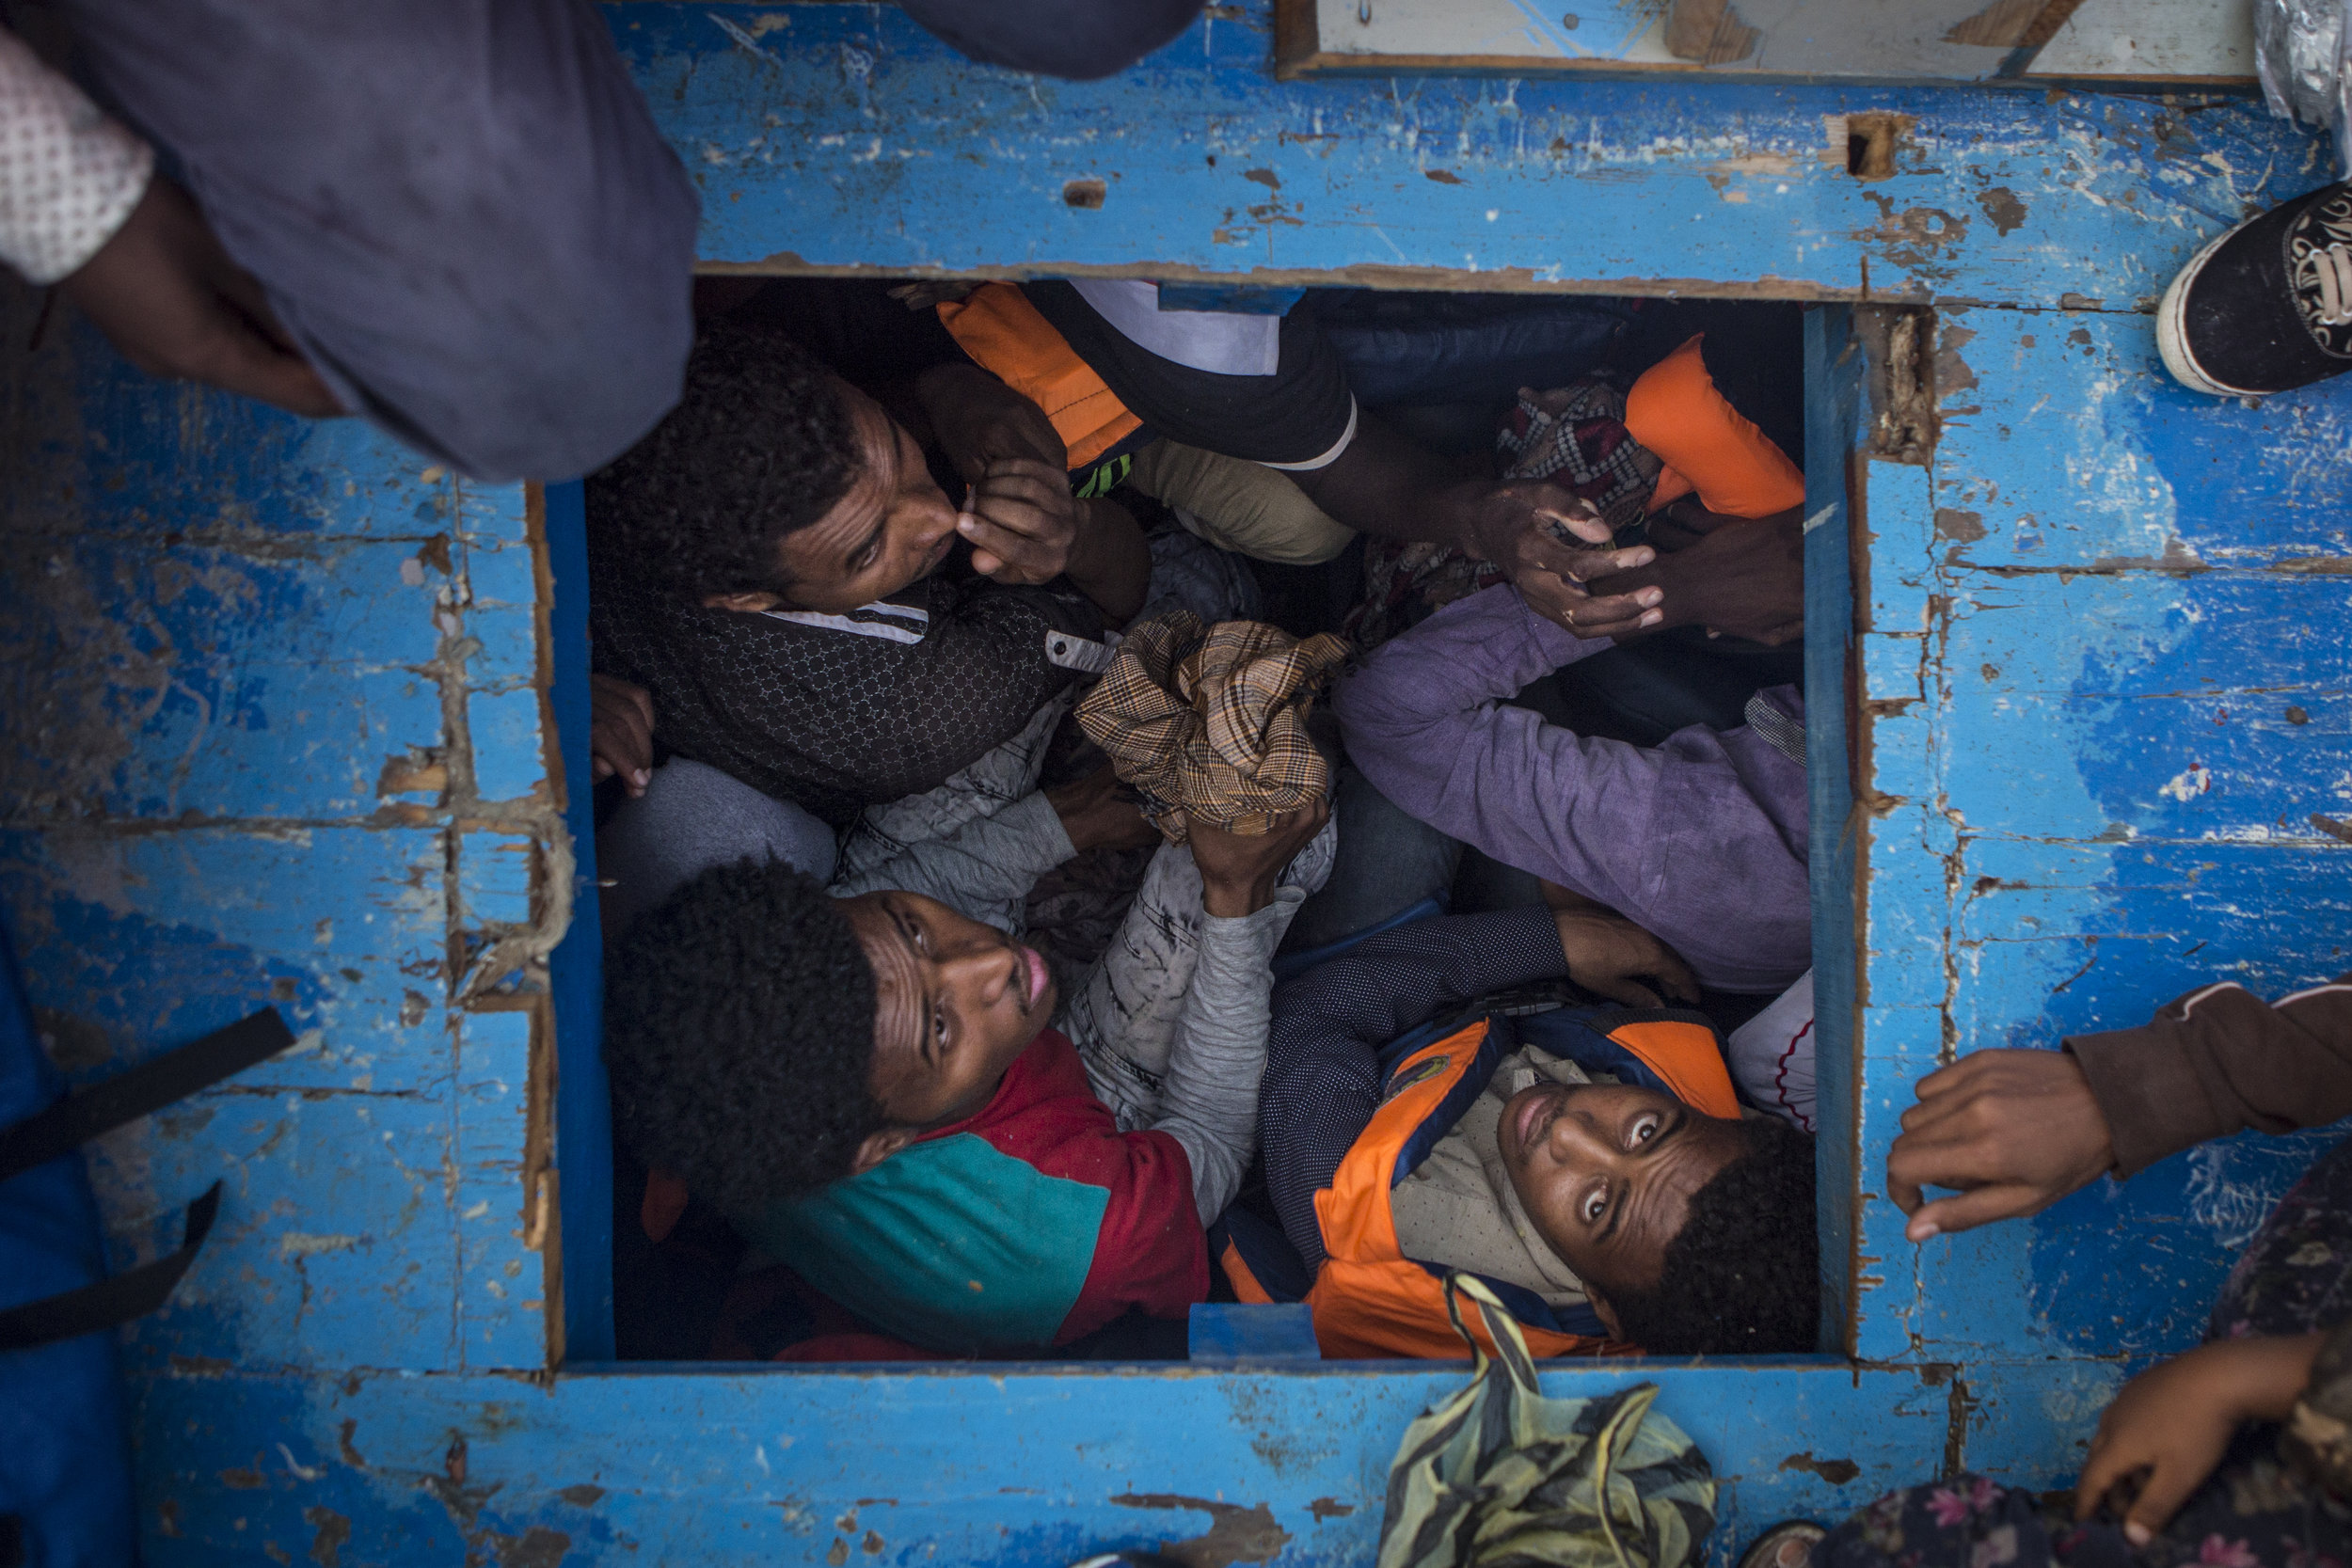  Inside the hold of a large wooden boat where over 500 people were attempting to cross the mediterranean sea � Mathieu Willcocks/MOAS.eu 2016, all rights reserved. 